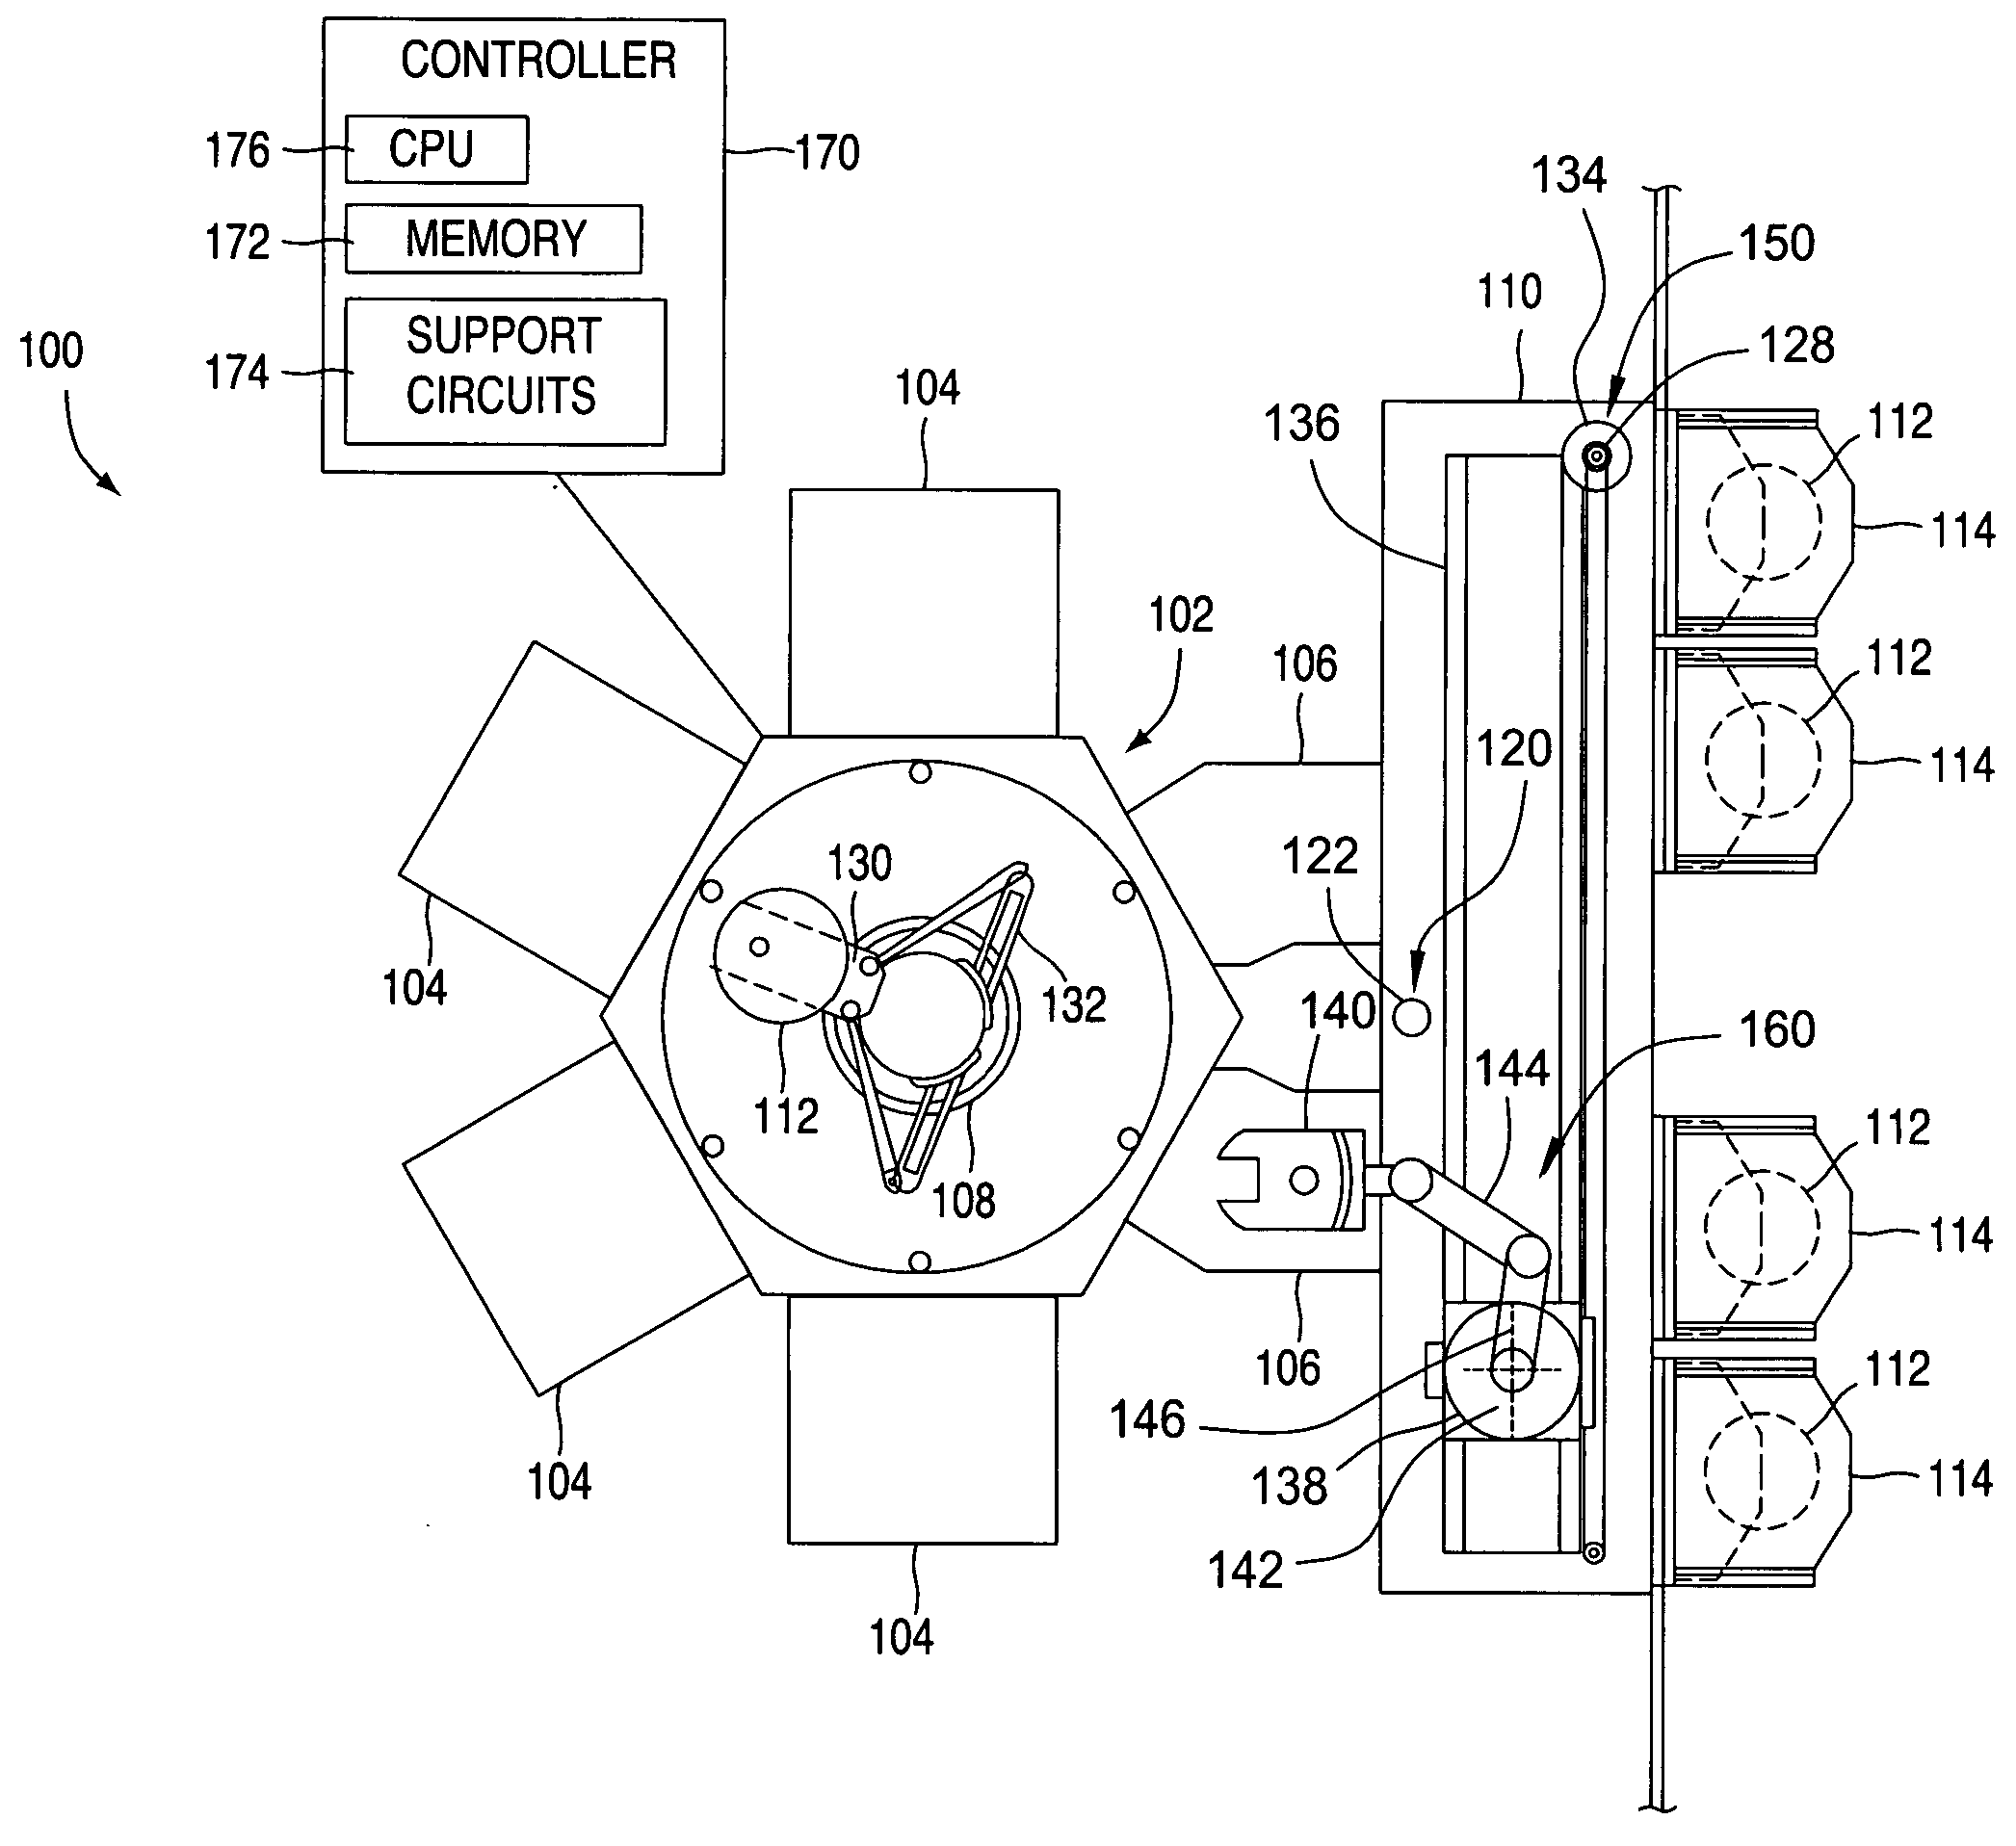 Method and apparatus for monitoring the position of a semiconductor processing robot